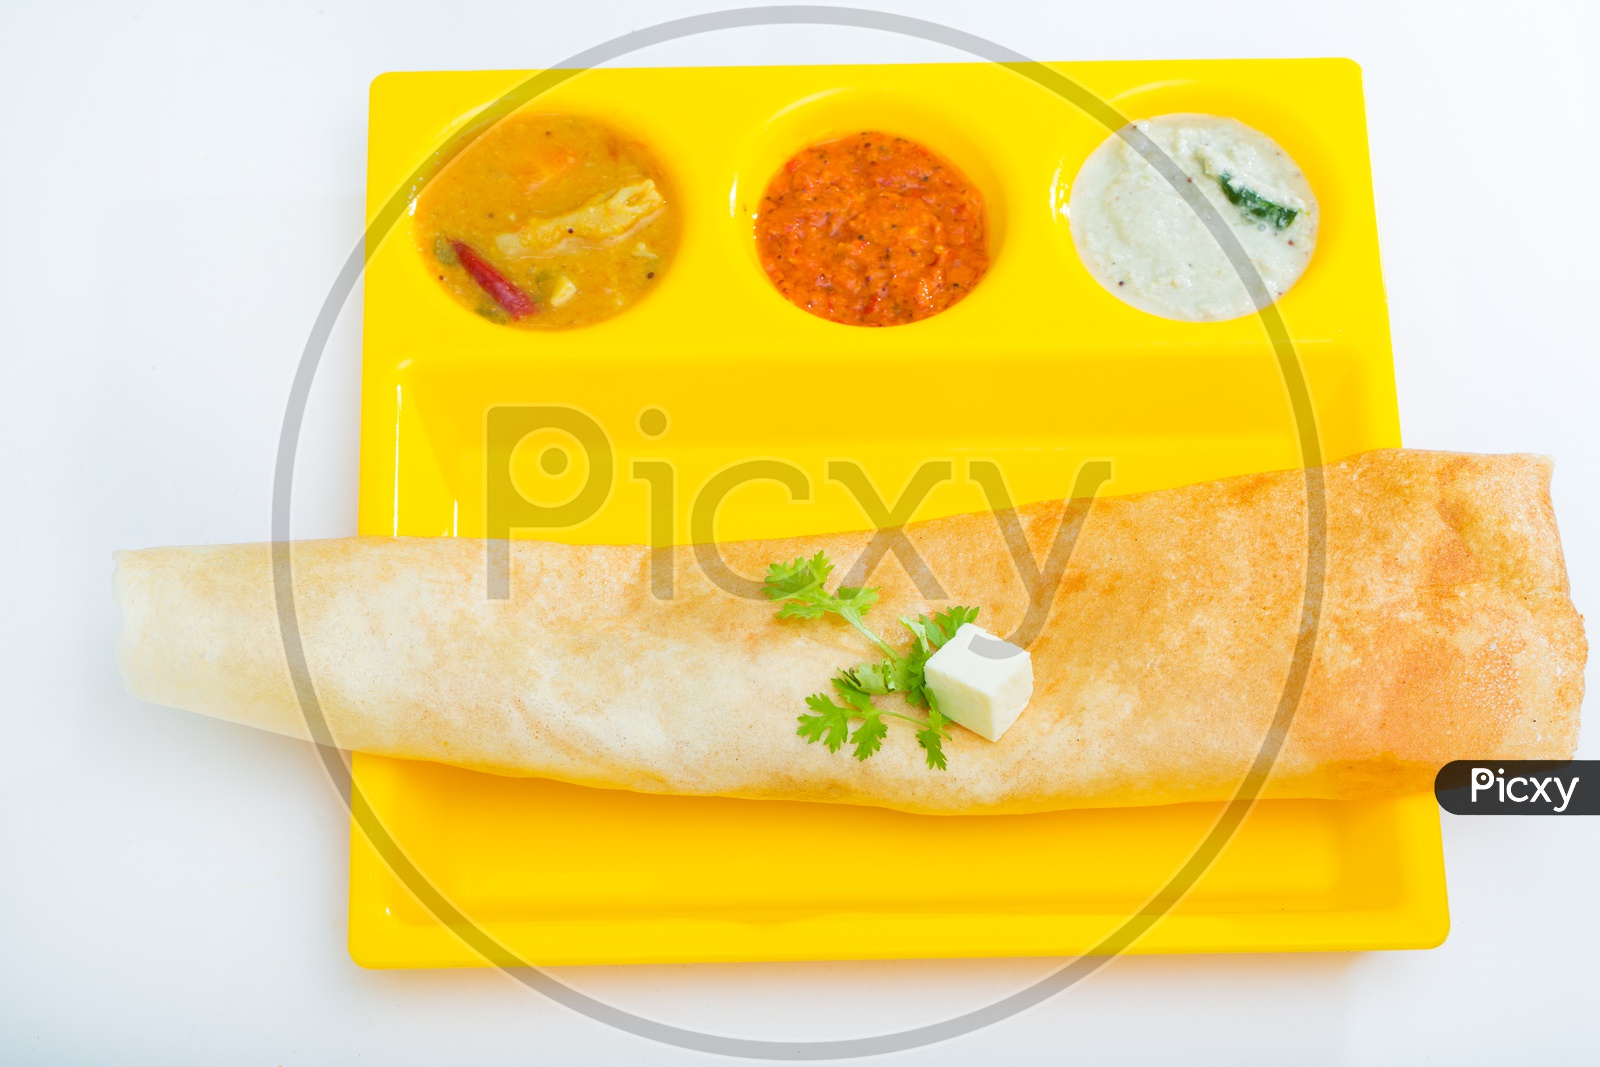 South Indian Food Dosa